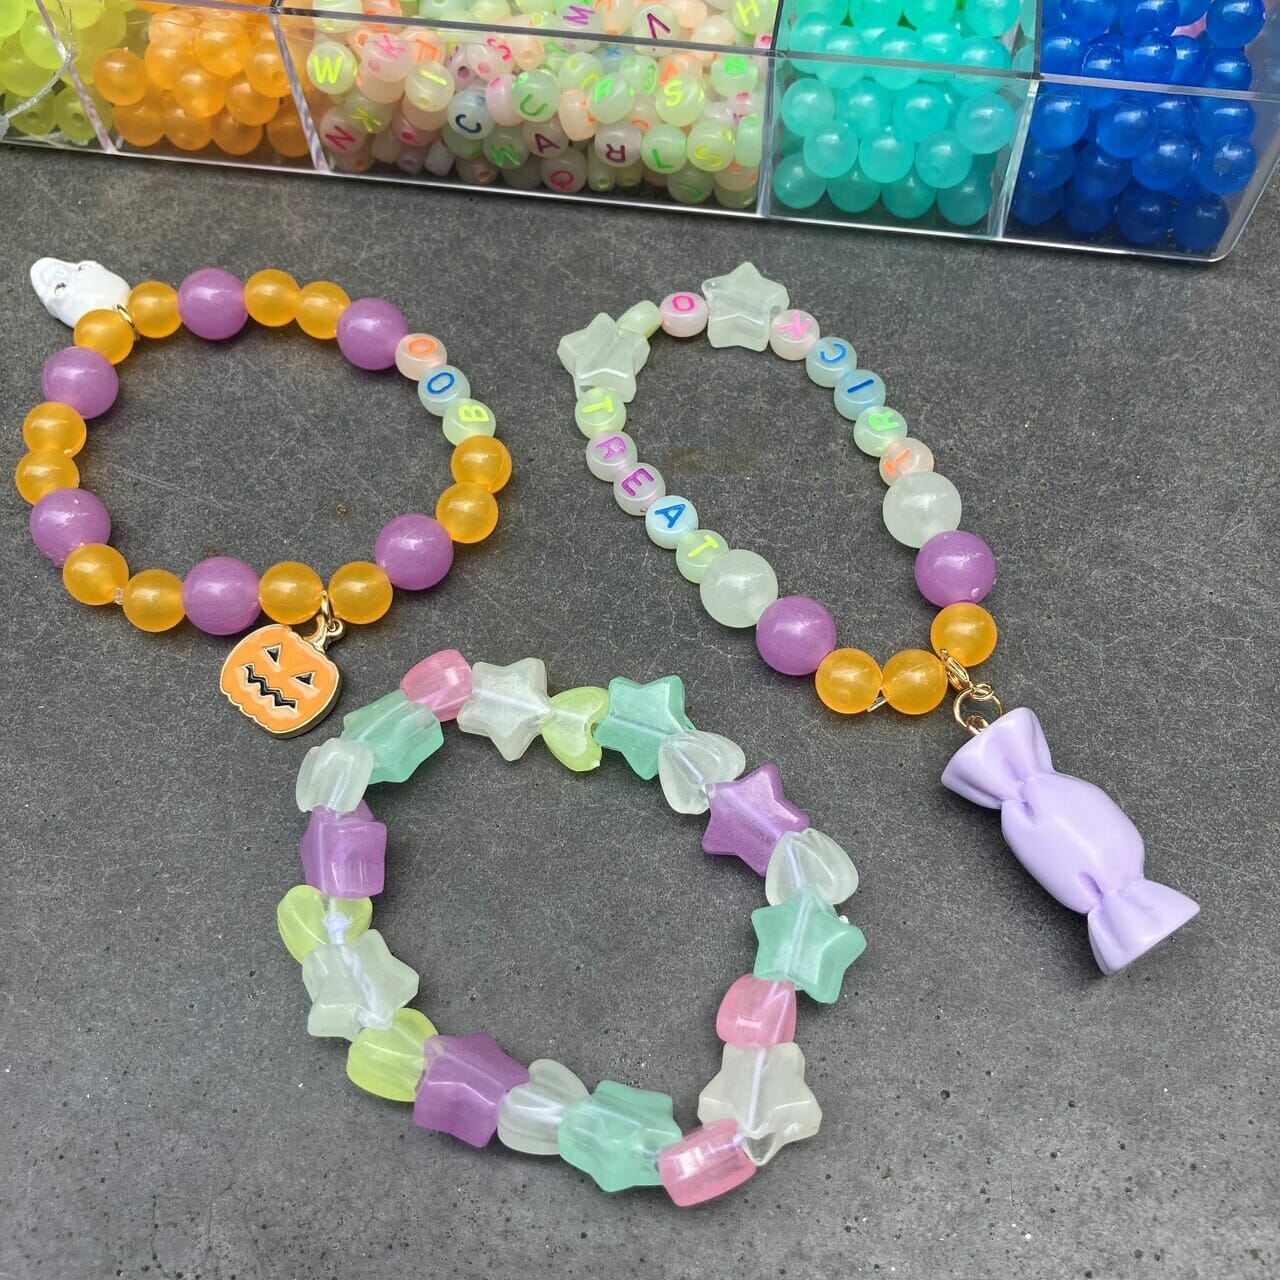 Today at Michaels Kids Club:  Glow Bracelets Stack